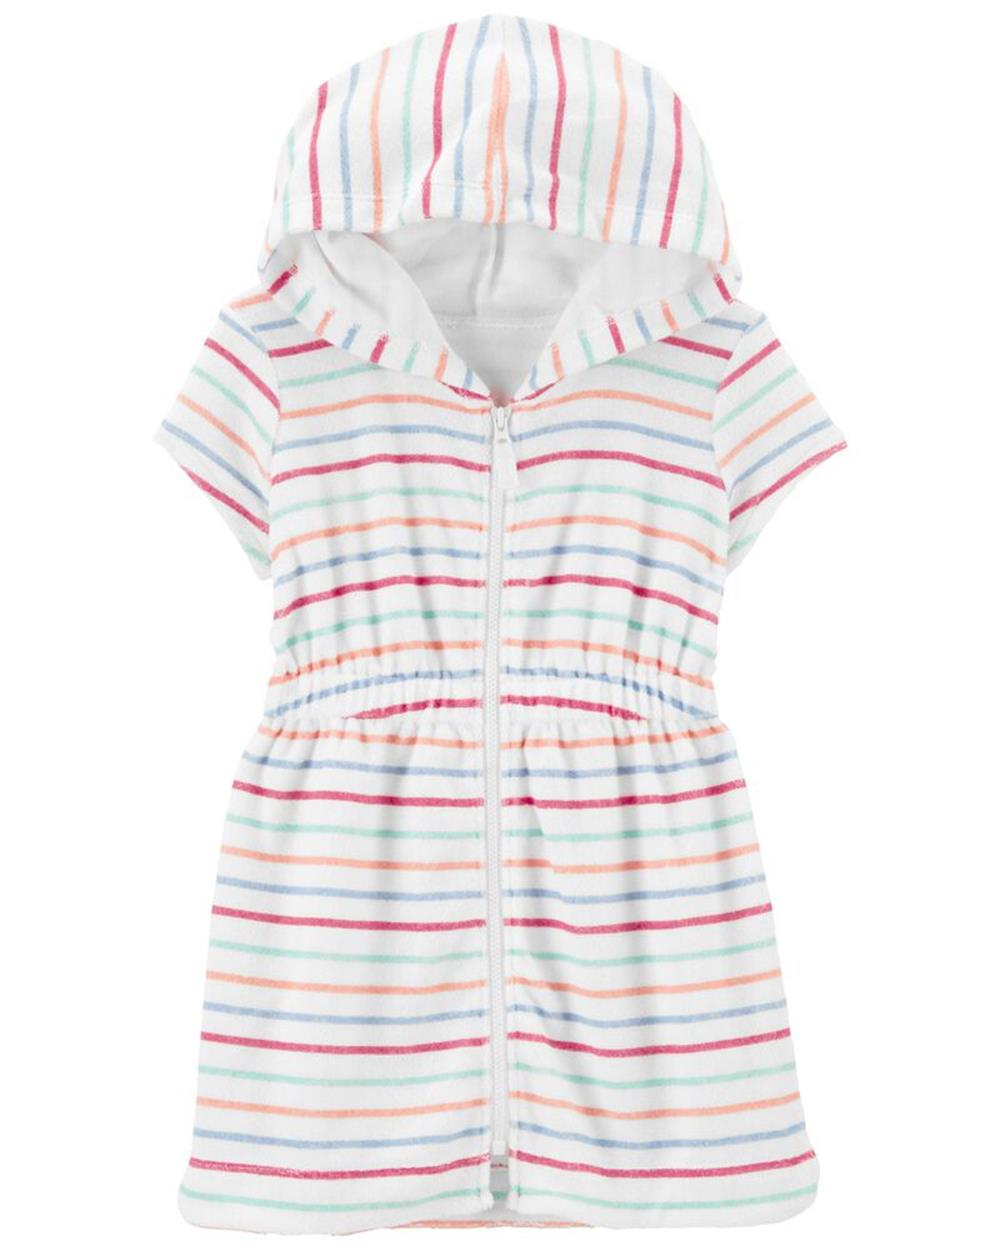 Carters Girls 2T-5T Striped Hooded Cover-up